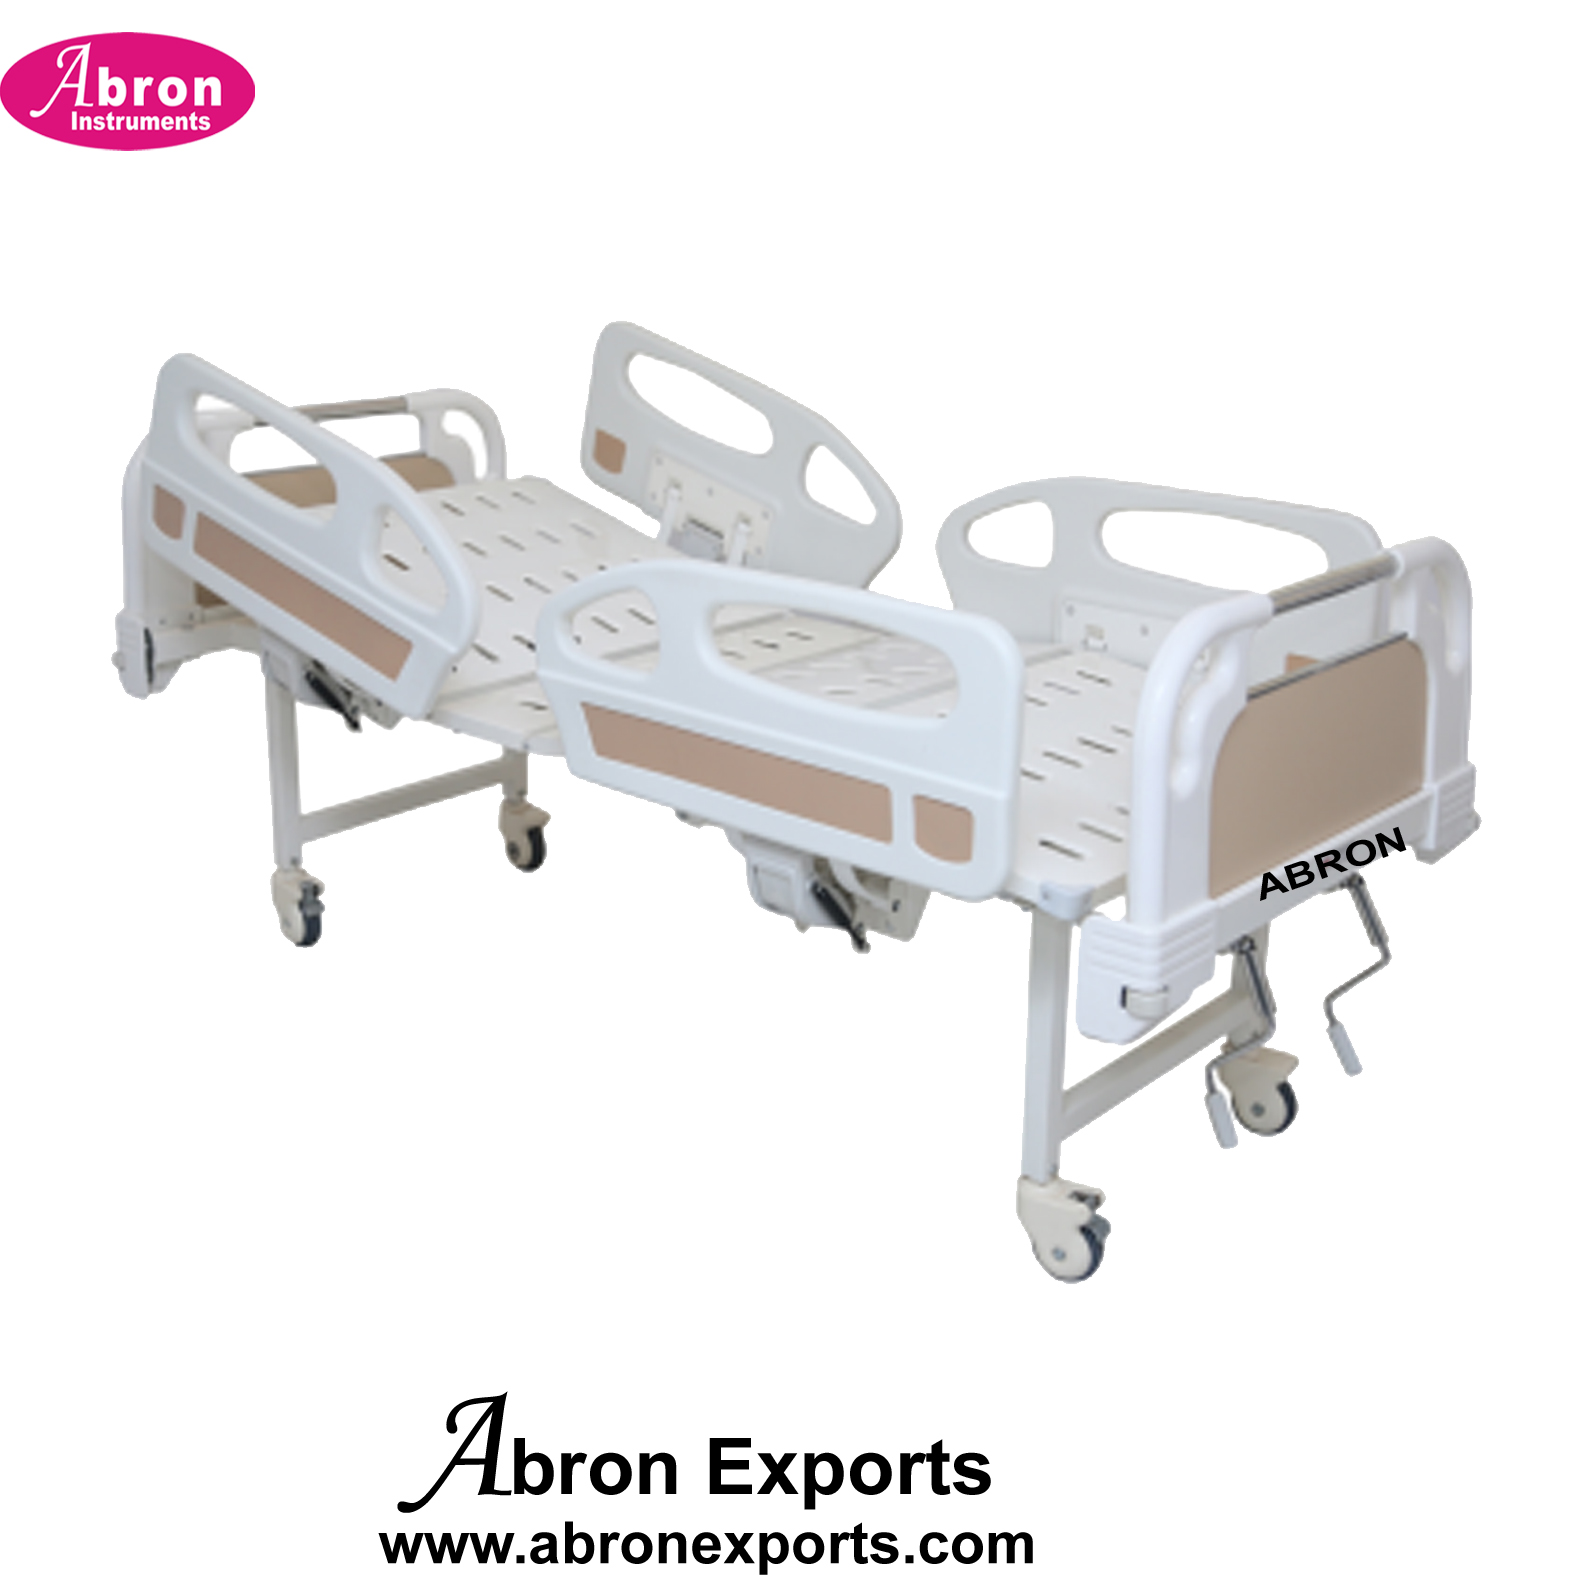 Patient Stretcher Fowler Bed Manual 2 function 4 wheels Emergency & Recovery Furniture Hospital U84 Abron ABM-2261SF2 